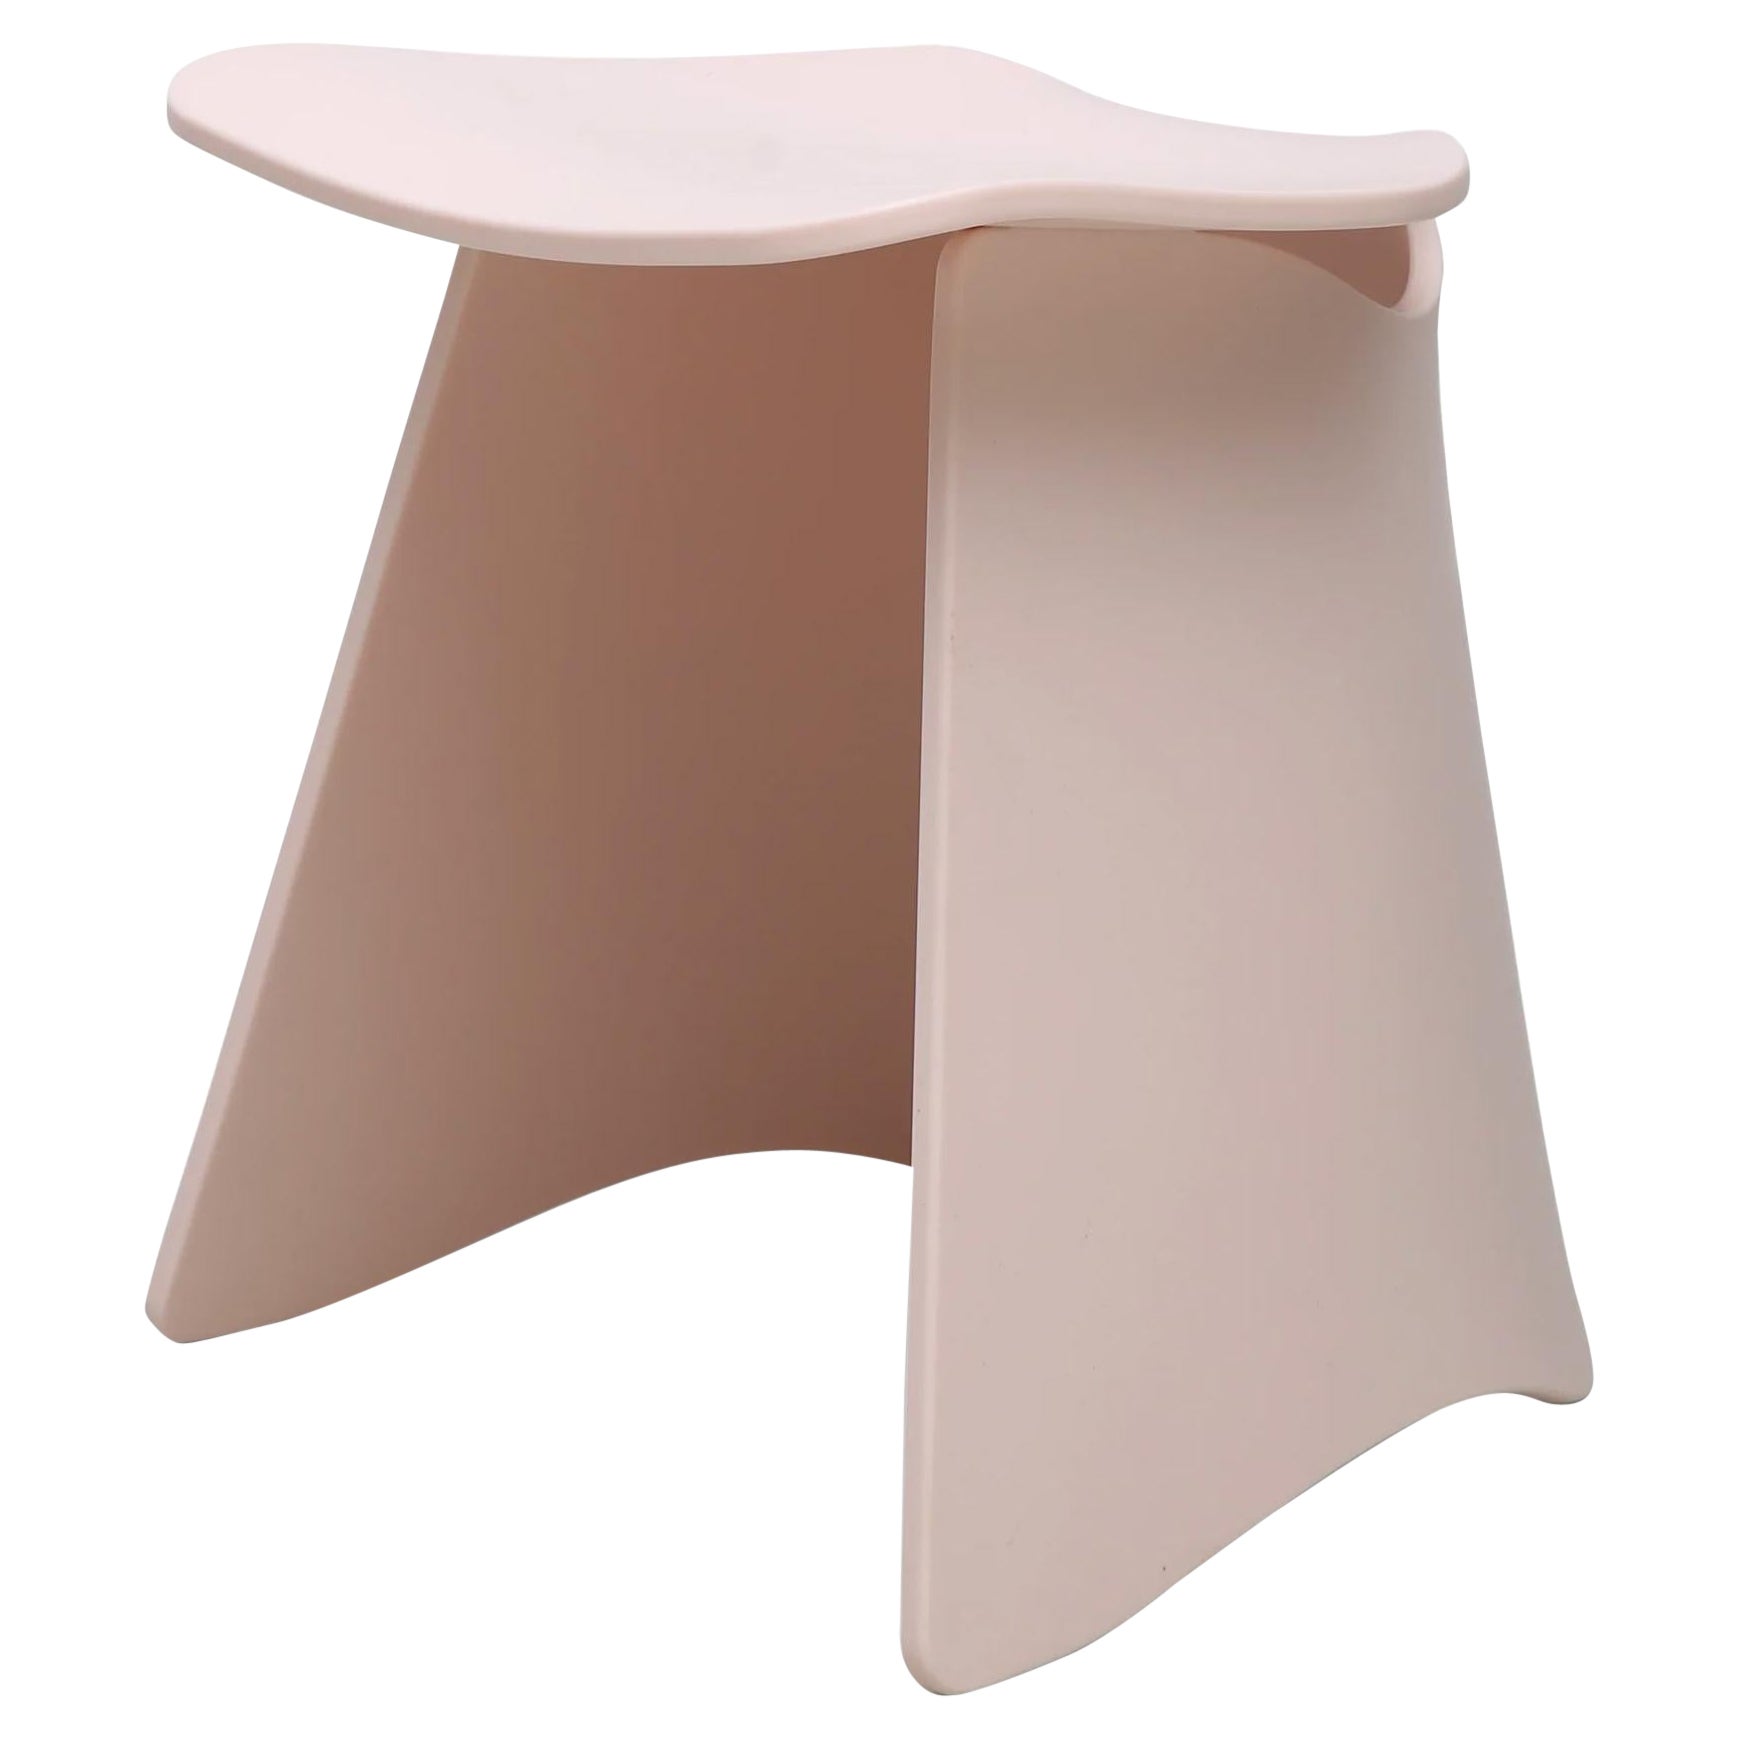 Flo Stool For Sale